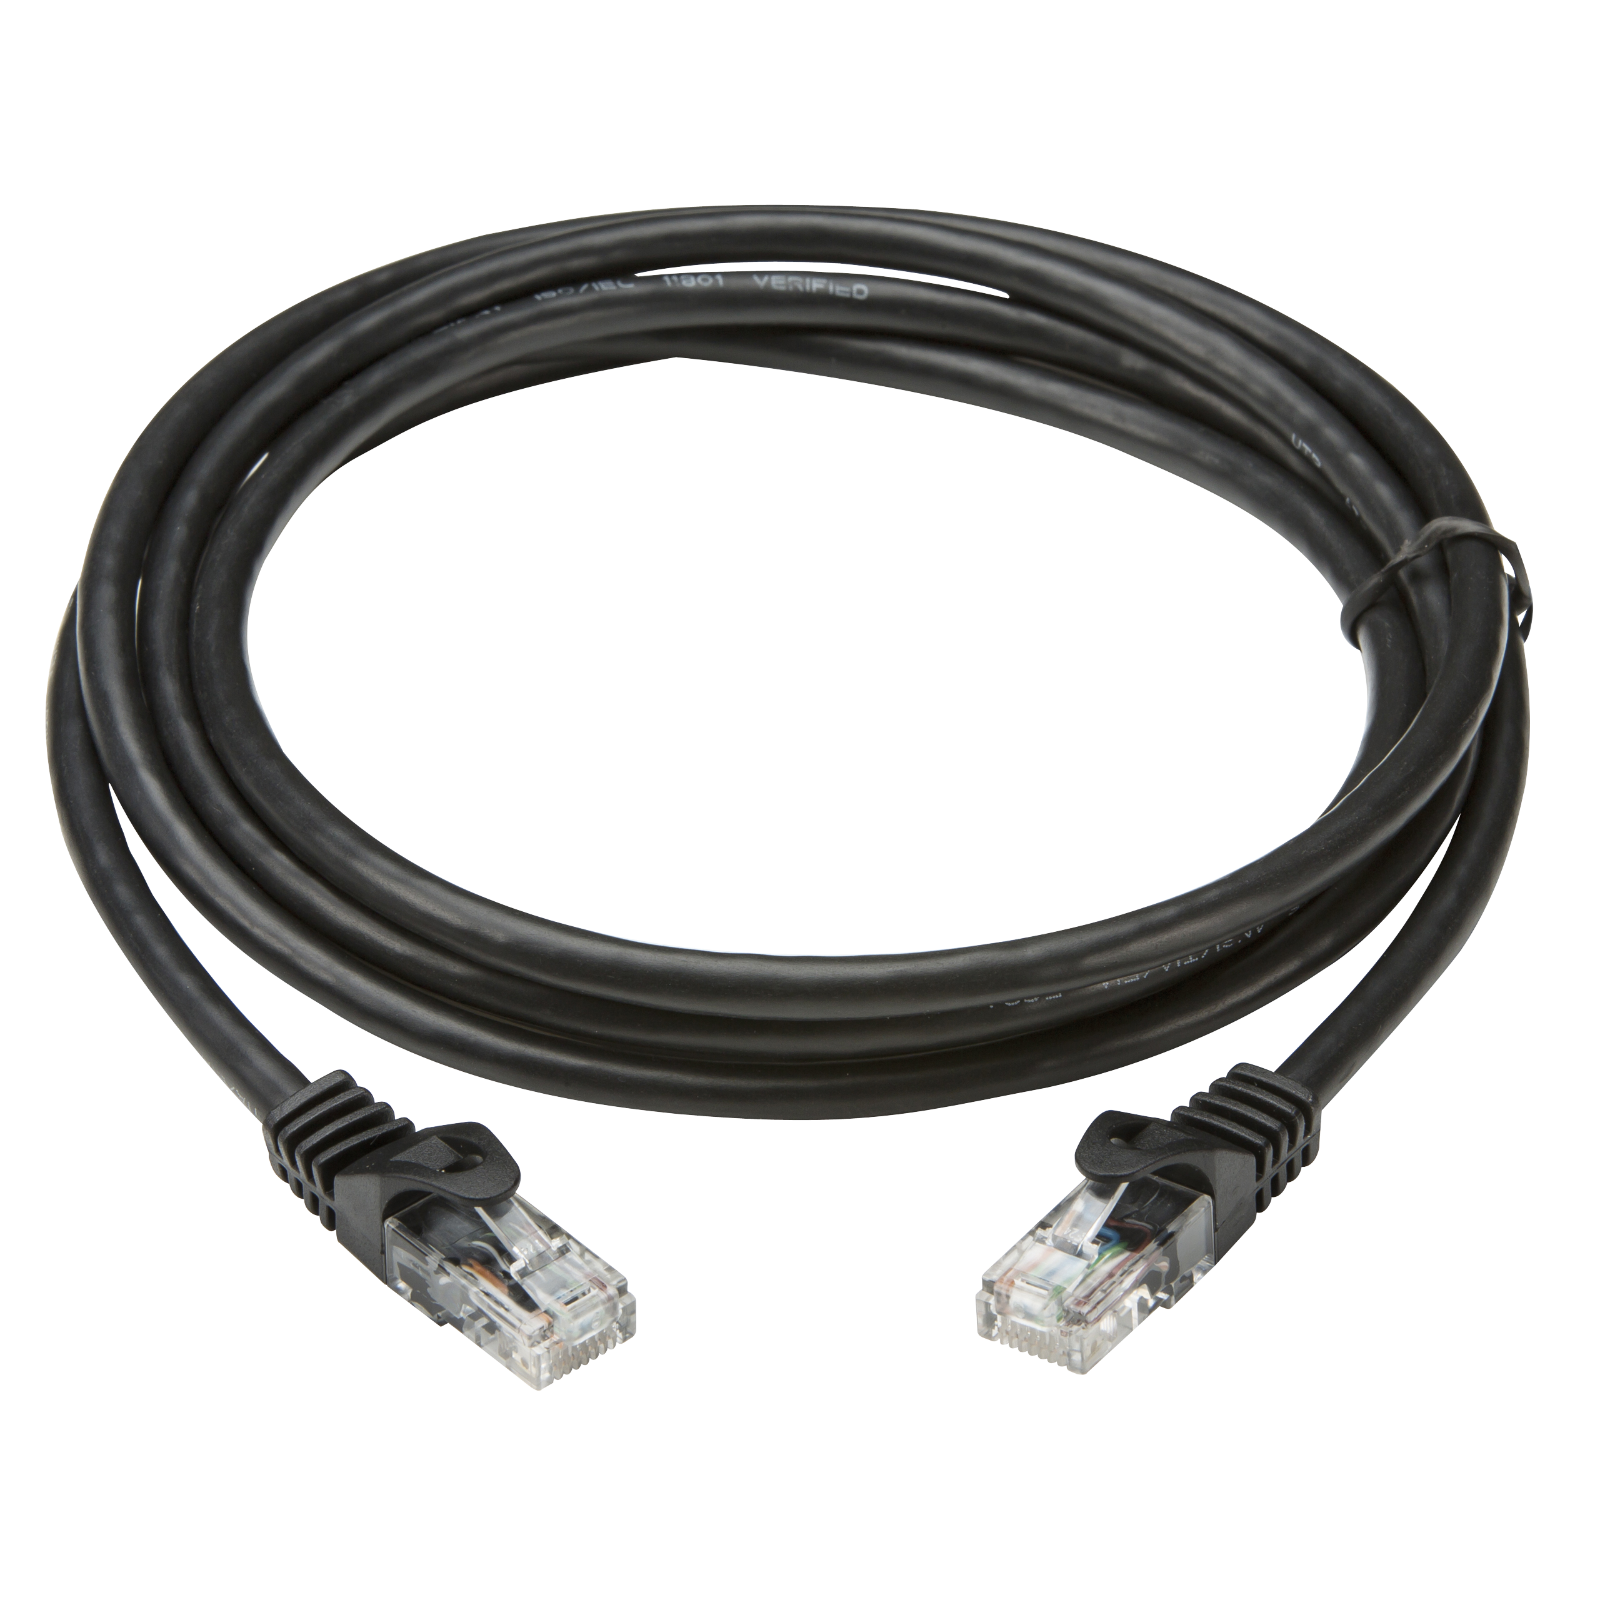 5m UTP CAT6 Networking Cable - Black - NETC65M 